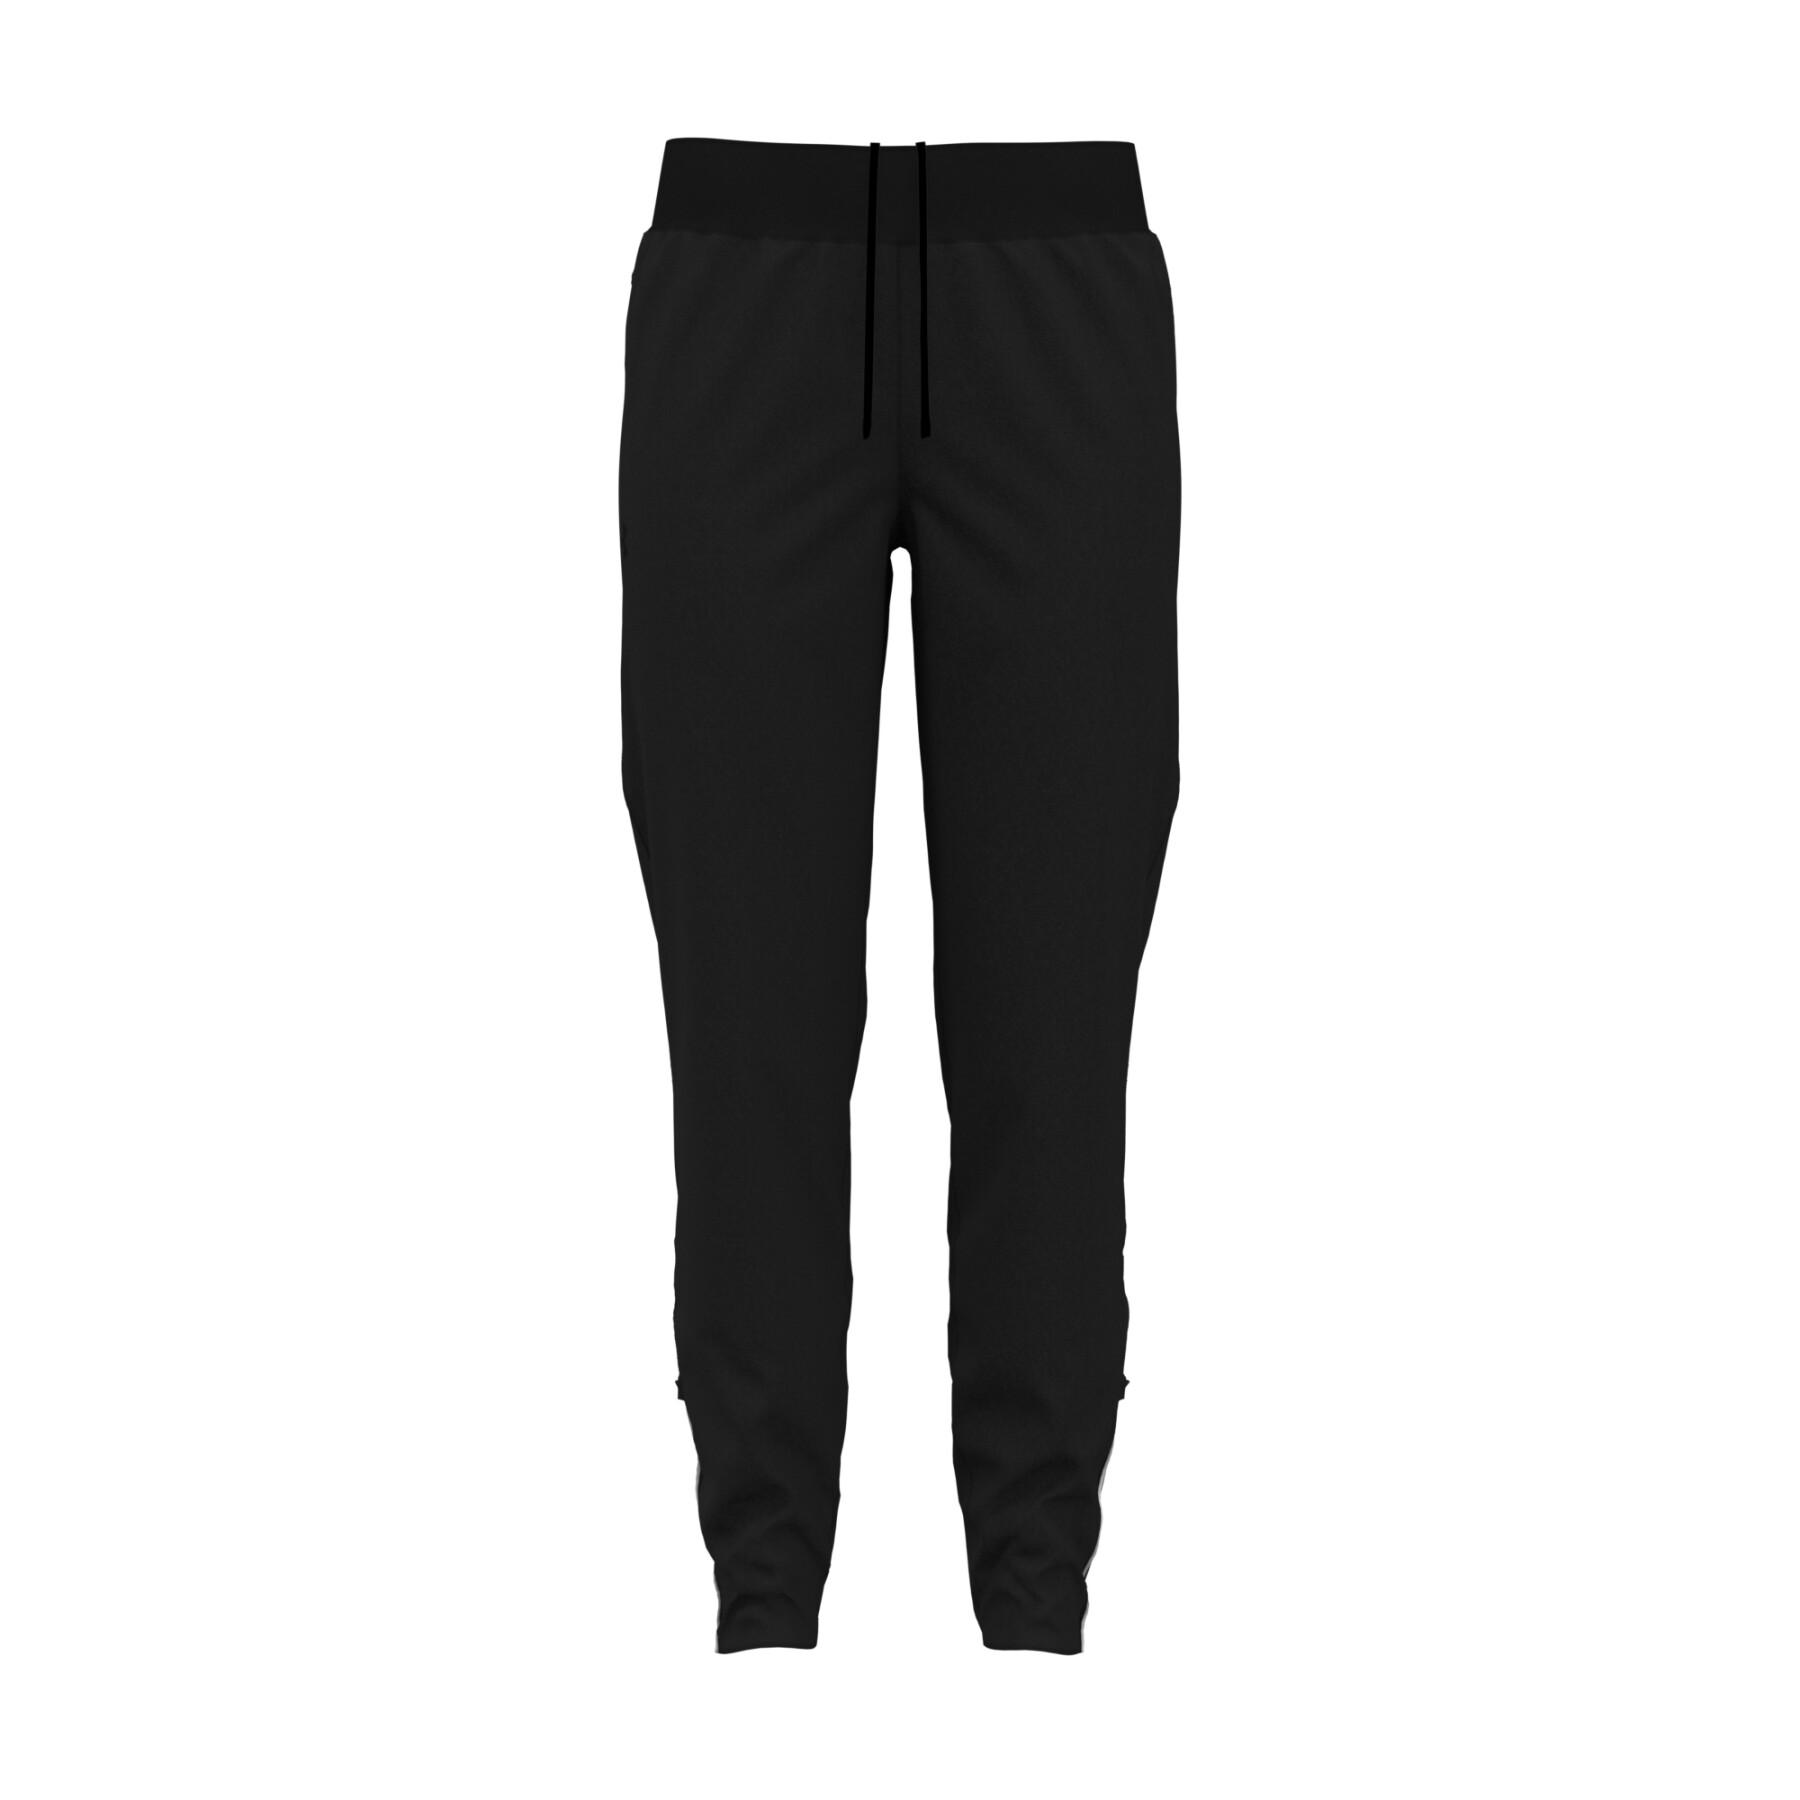 Under Armour womens Outrun the Storm Sp Pants,Black (001)/Reflective,X-Large